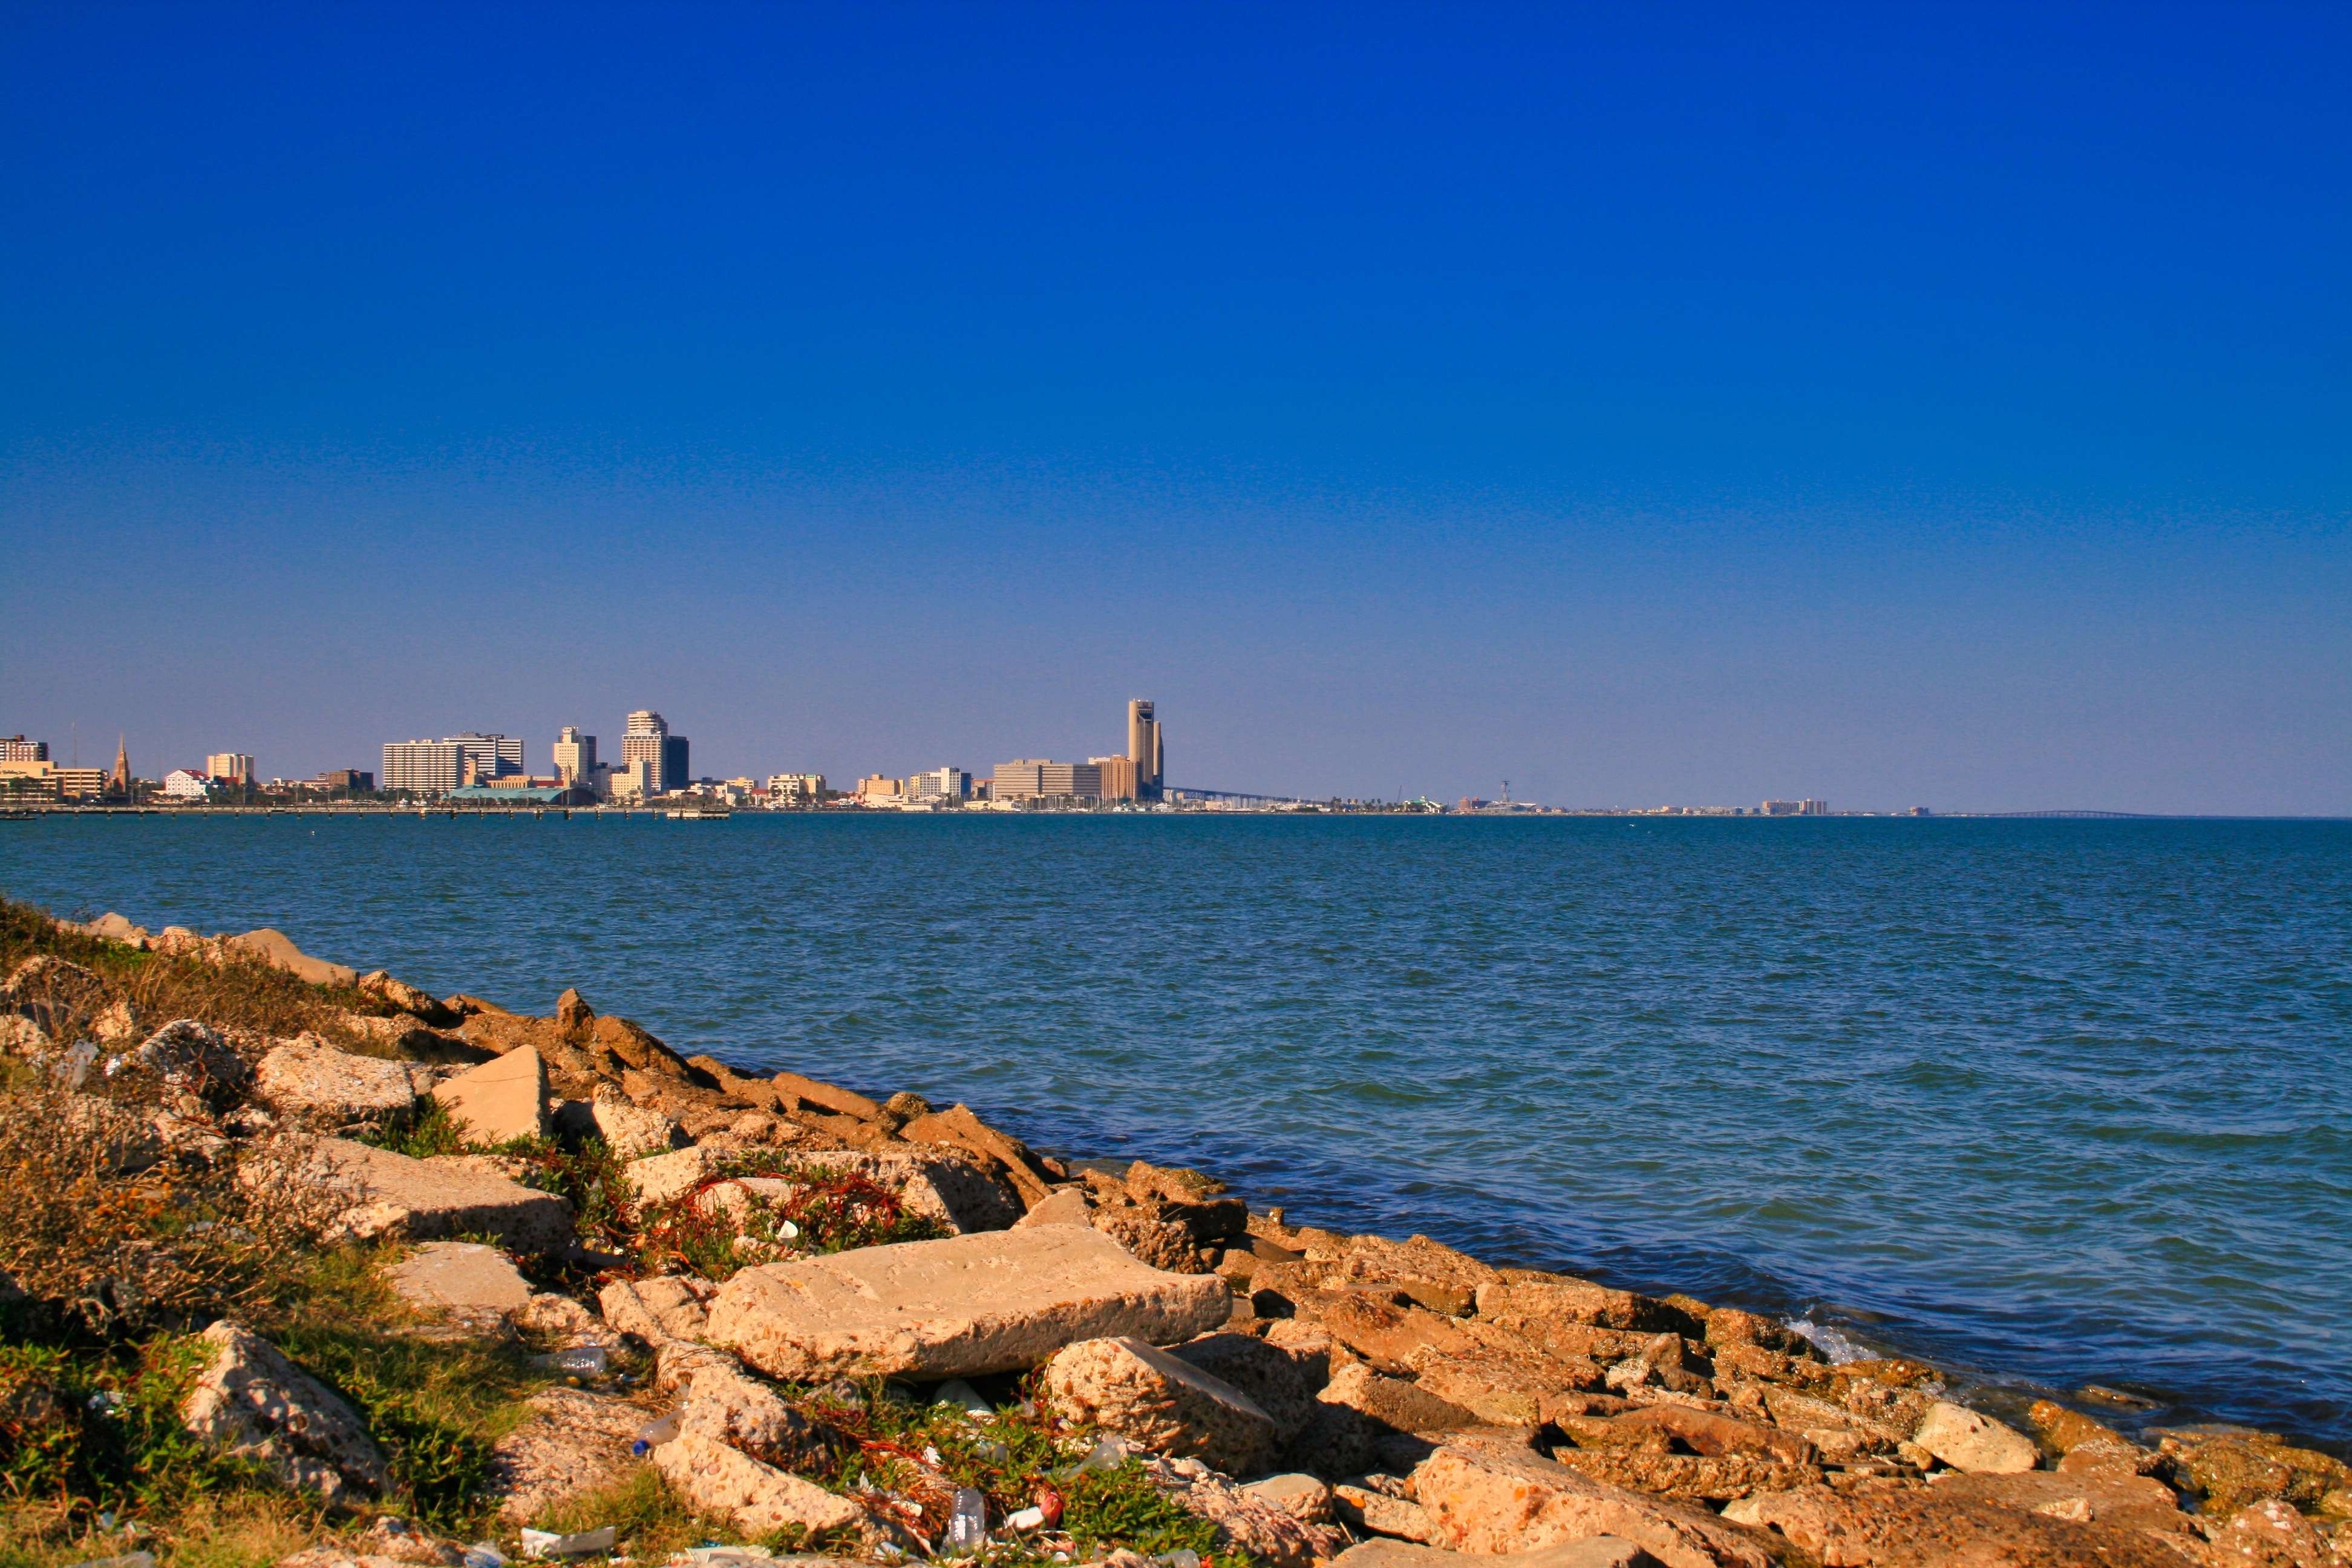 Coastal view of Corpus Christi with a clear blue sky and urban skyline from a rocky shoreline.